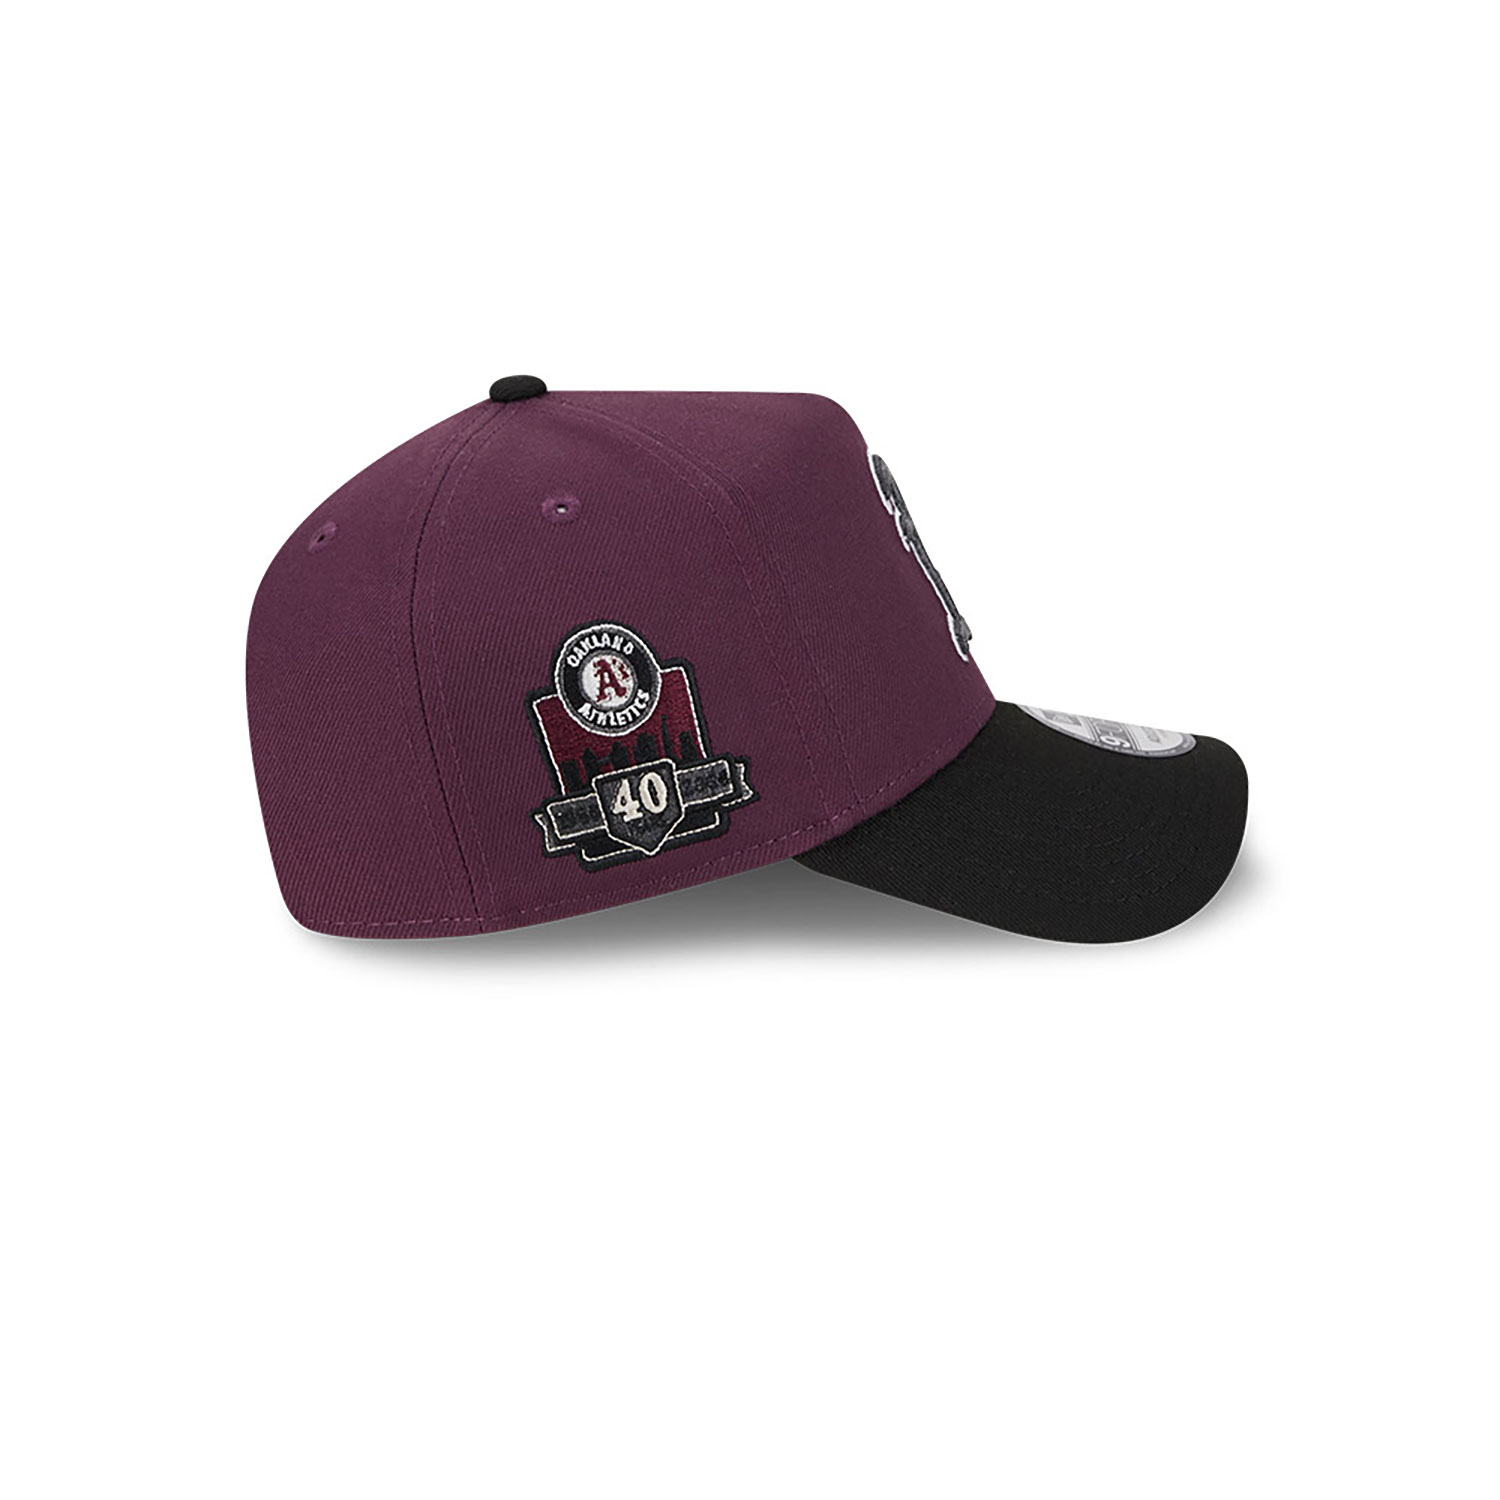 Oakland Athletics Two-Tone Dark Purple 9FORTY A-Frame Adjustable Cap